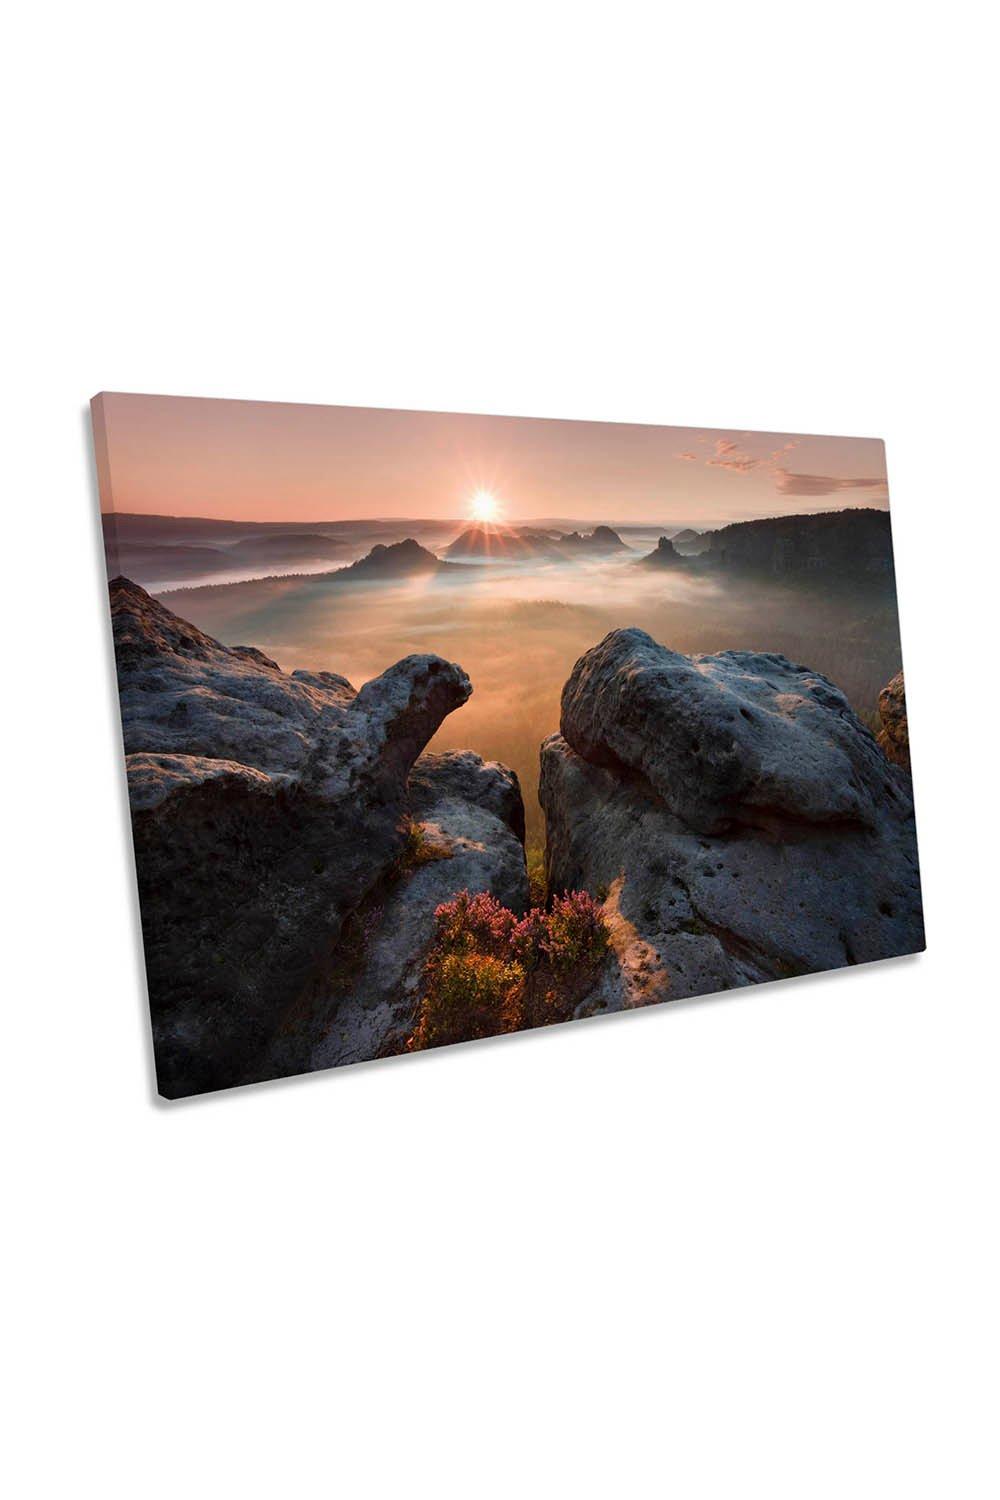 Sunrise on the Rocks Mountains Canvas Wall Art Picture Print